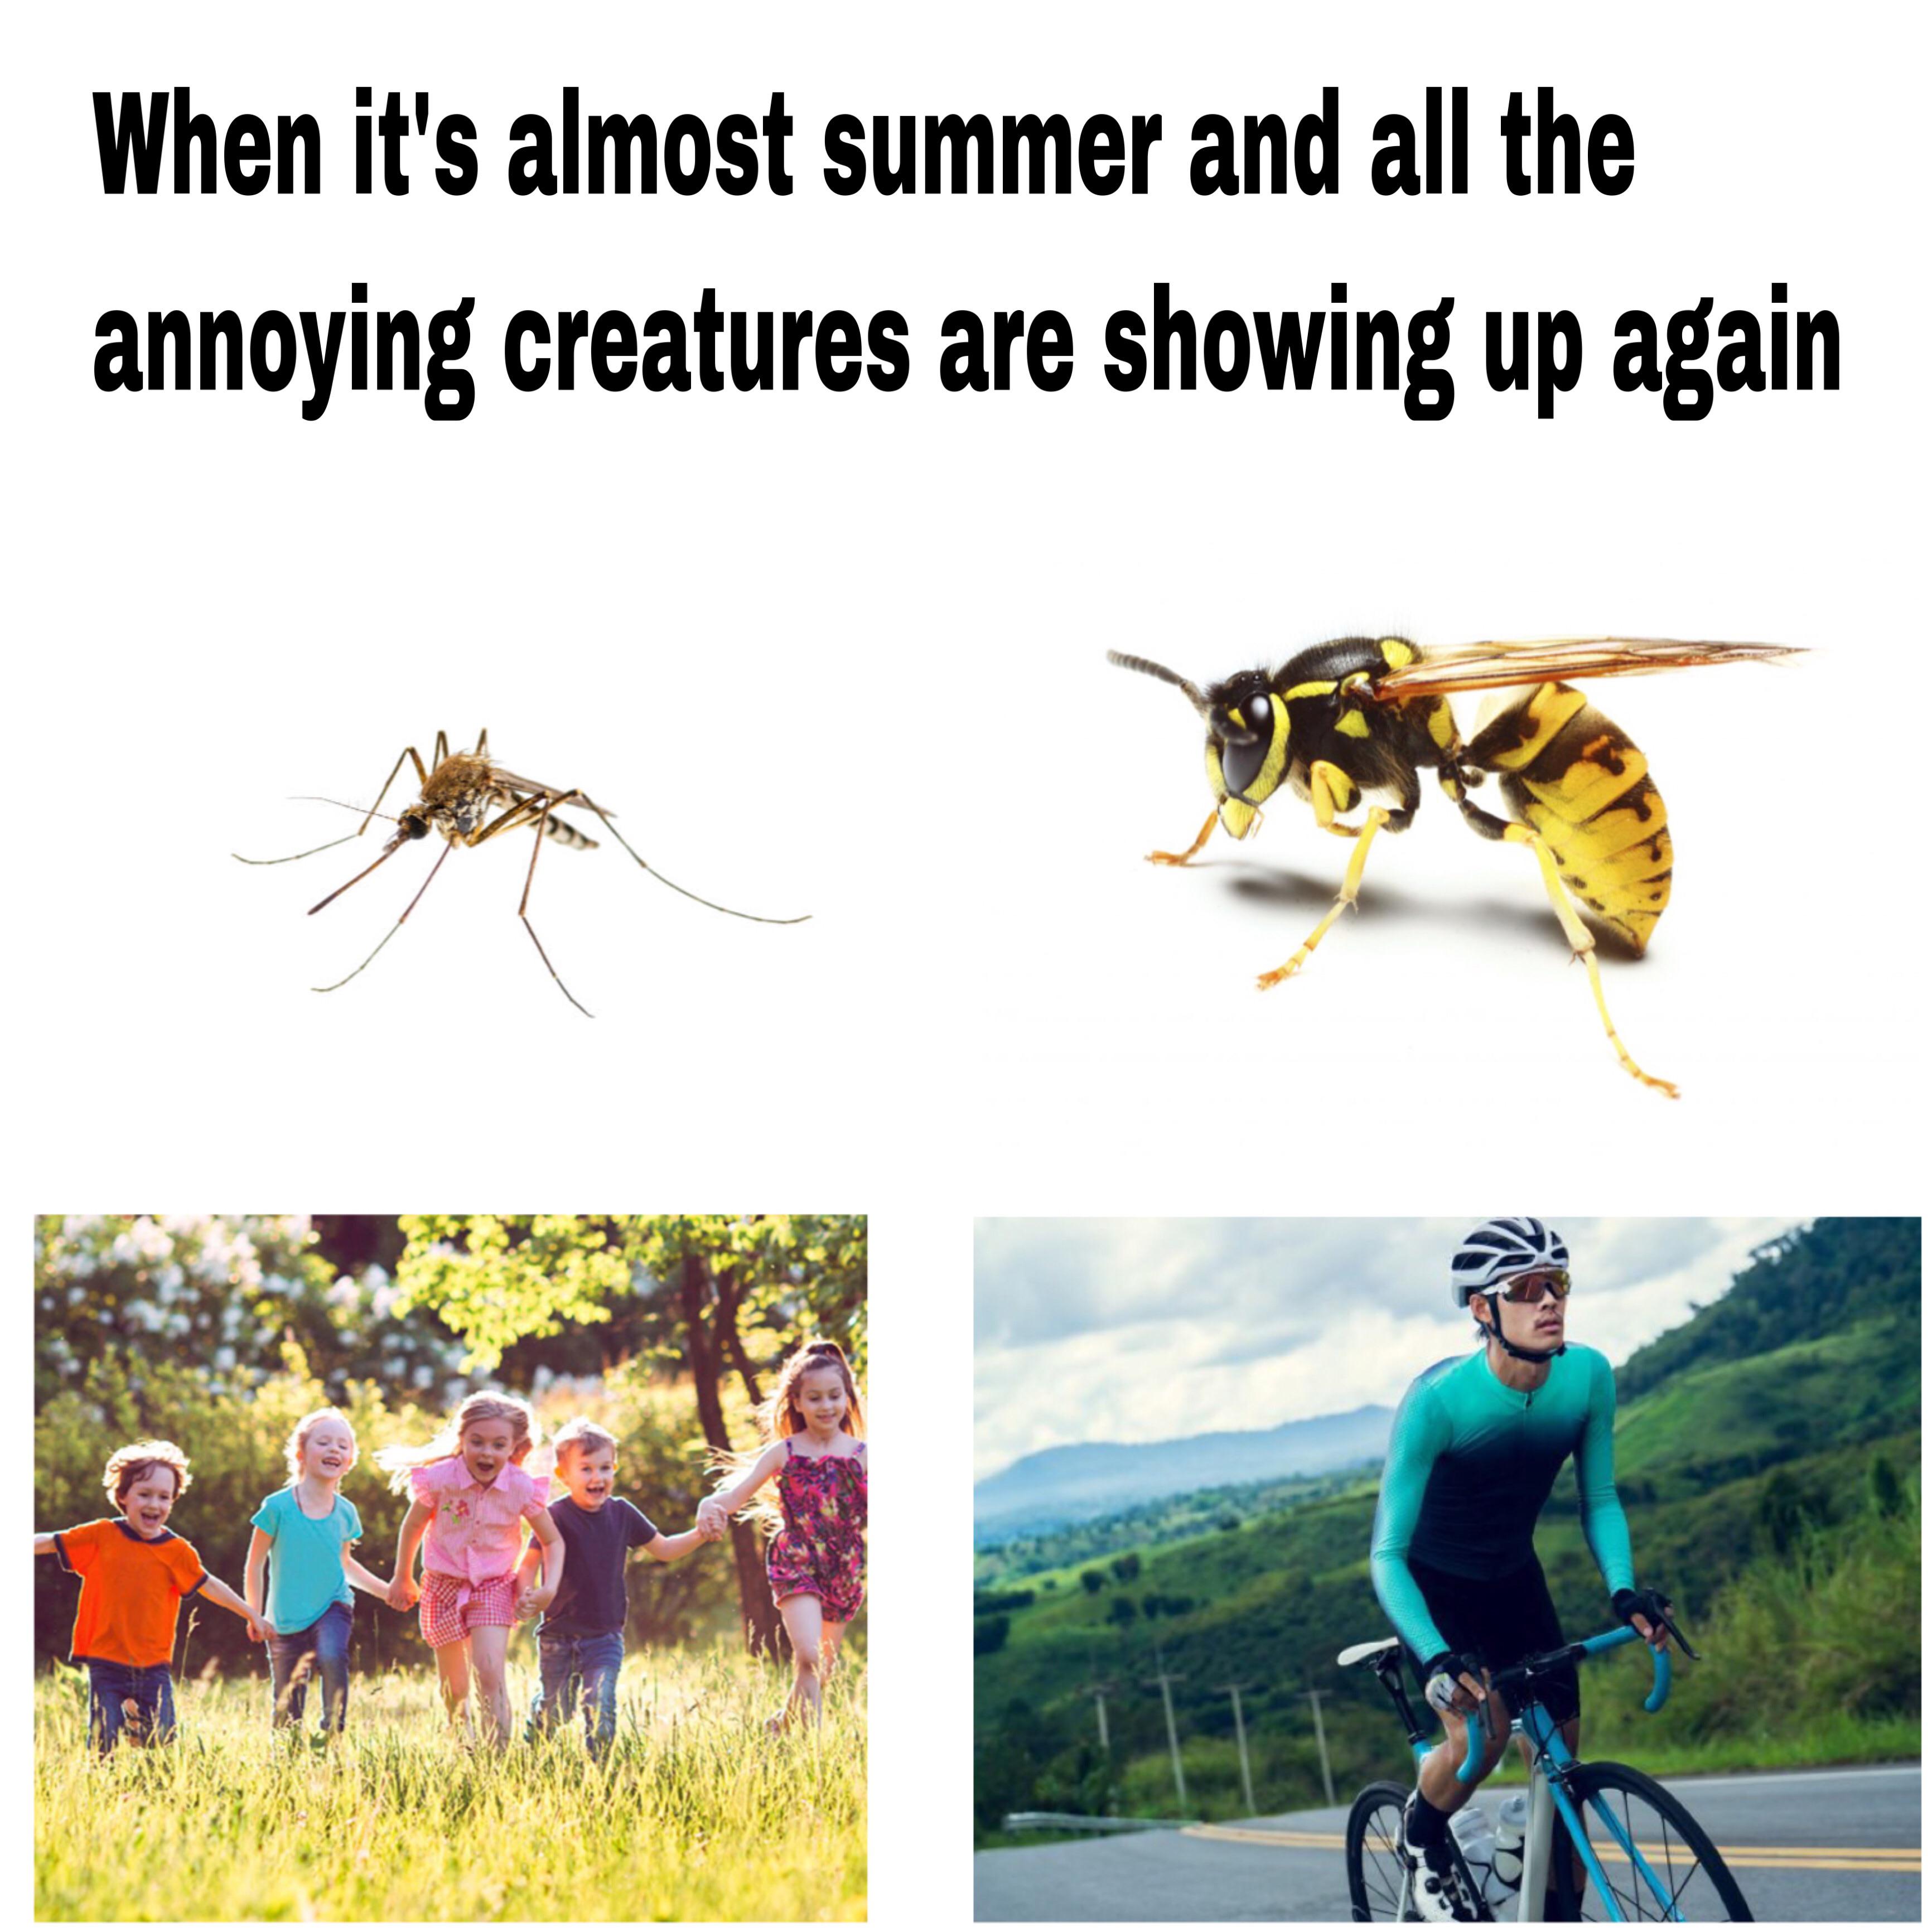 funny memes - dank memes - fauna - When it's almost summer and all the annoying creatures are showing up again